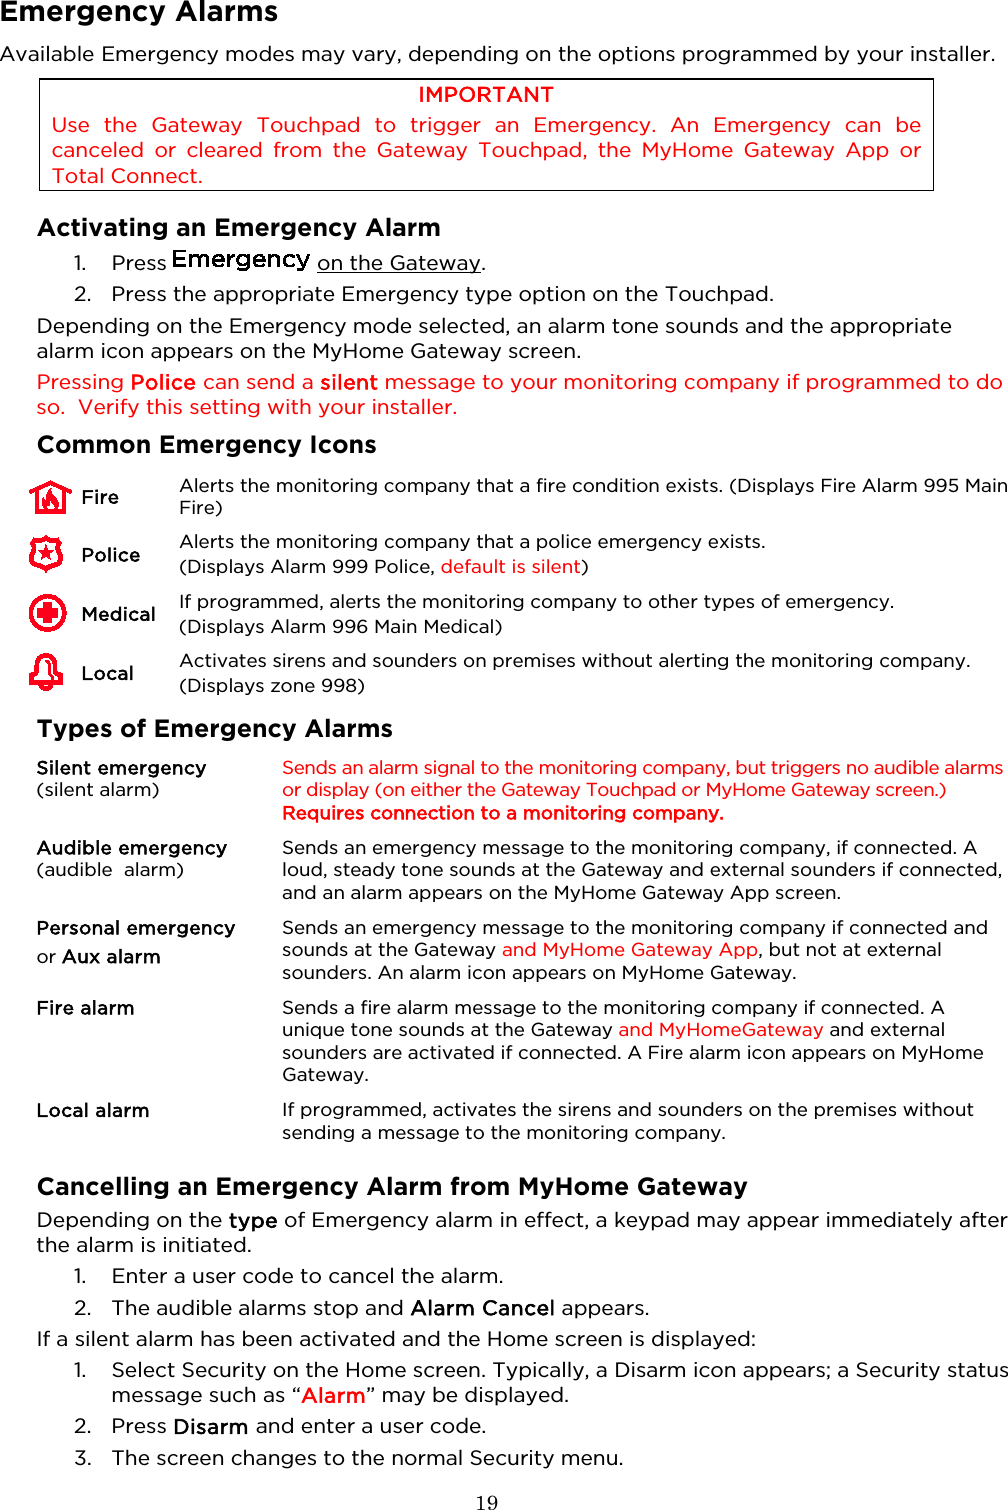  19  Emergency Alarms Available Emergency modes may vary, depending on the options programmed by your installer. IMPORTANT Use the Gateway Touchpad to trigger an  Emergency. An Emergency can be canceled or cleared from the Gateway Touchpad, the MyHome Gateway App or Total Connect.   Activating an Emergency Alarm 1. Press   on the Gateway. 2. Press the appropriate Emergency type option on the Touchpad. Depending on the Emergency mode selected, an alarm tone sounds and the appropriate alarm icon appears on the MyHome Gateway screen.  Pressing Police can send a silent message to your monitoring company if programmed to do so.  Verify this setting with your installer.  Common Emergency Icons  Fire Alerts the monitoring company that a fire condition exists. (Displays Fire Alarm 995 Main Fire)     Police Alerts the monitoring company that a police emergency exists.  (Displays Alarm 999 Police, default is silent)     Medical If programmed, alerts the monitoring company to other types of emergency.  (Displays Alarm 996 Main Medical)     Local Activates sirens and sounders on premises without alerting the monitoring company. (Displays zone 998)  Types of Emergency Alarms Silent emergency (silent alarm) Sends an alarm signal to the monitoring company, but triggers no audible alarms or display (on either the Gateway Touchpad or MyHome Gateway screen.) Requires connection to a monitoring company. Audible emergency (audible  alarm) Sends an emergency message to the monitoring company, if connected. A loud, steady tone sounds at the Gateway and external sounders if connected, and an alarm appears on the MyHome Gateway App screen. Personal emergency or Aux alarm Sends an emergency message to the monitoring company if connected and sounds at the Gateway and MyHome Gateway App, but not at external sounders. An alarm icon appears on MyHome Gateway. Fire alarm Sends a fire alarm message to the monitoring company if connected. A unique tone sounds at the Gateway and MyHomeGateway and external sounders are activated if connected. A Fire alarm icon appears on MyHome Gateway. Local alarm If programmed, activates the sirens and sounders on the premises without sending a message to the monitoring company.  Cancelling an Emergency Alarm from MyHome Gateway Depending on the type of Emergency alarm in effect, a keypad may appear immediately after the alarm is initiated.  1. Enter a user code to cancel the alarm. 2. The audible alarms stop and Alarm Cancel appears. If a silent alarm has been activated and the Home screen is displayed:  1. Select Security on the Home screen. Typically, a Disarm icon appears; a Security status message such as “Alarm” may be displayed.  2. Press Disarm and enter a user code. 3. The screen changes to the normal Security menu.   